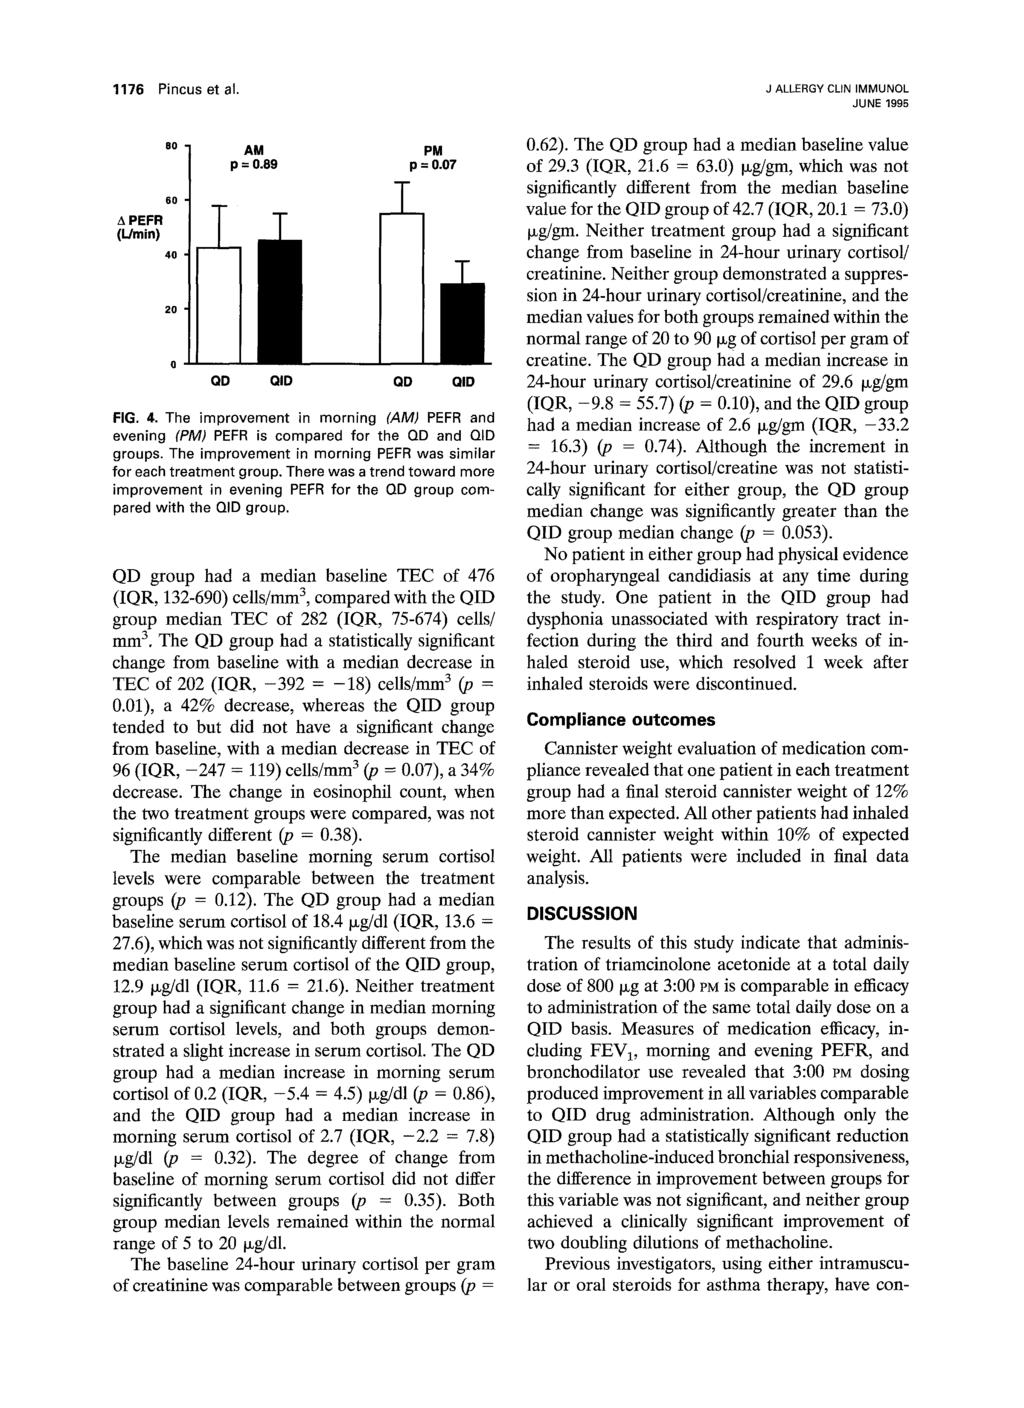 1176 Pincus et al. J ALLERGYCLIN IMMUNOL JUNE 1995 A PEFR (L/min) 80 6O 40 20 PM p = 0.07 QD QID QD QID FIG. 4. The improvement in morning (AM) PEFR and evening (PM) PEFR is compared for the QD and QID groups.